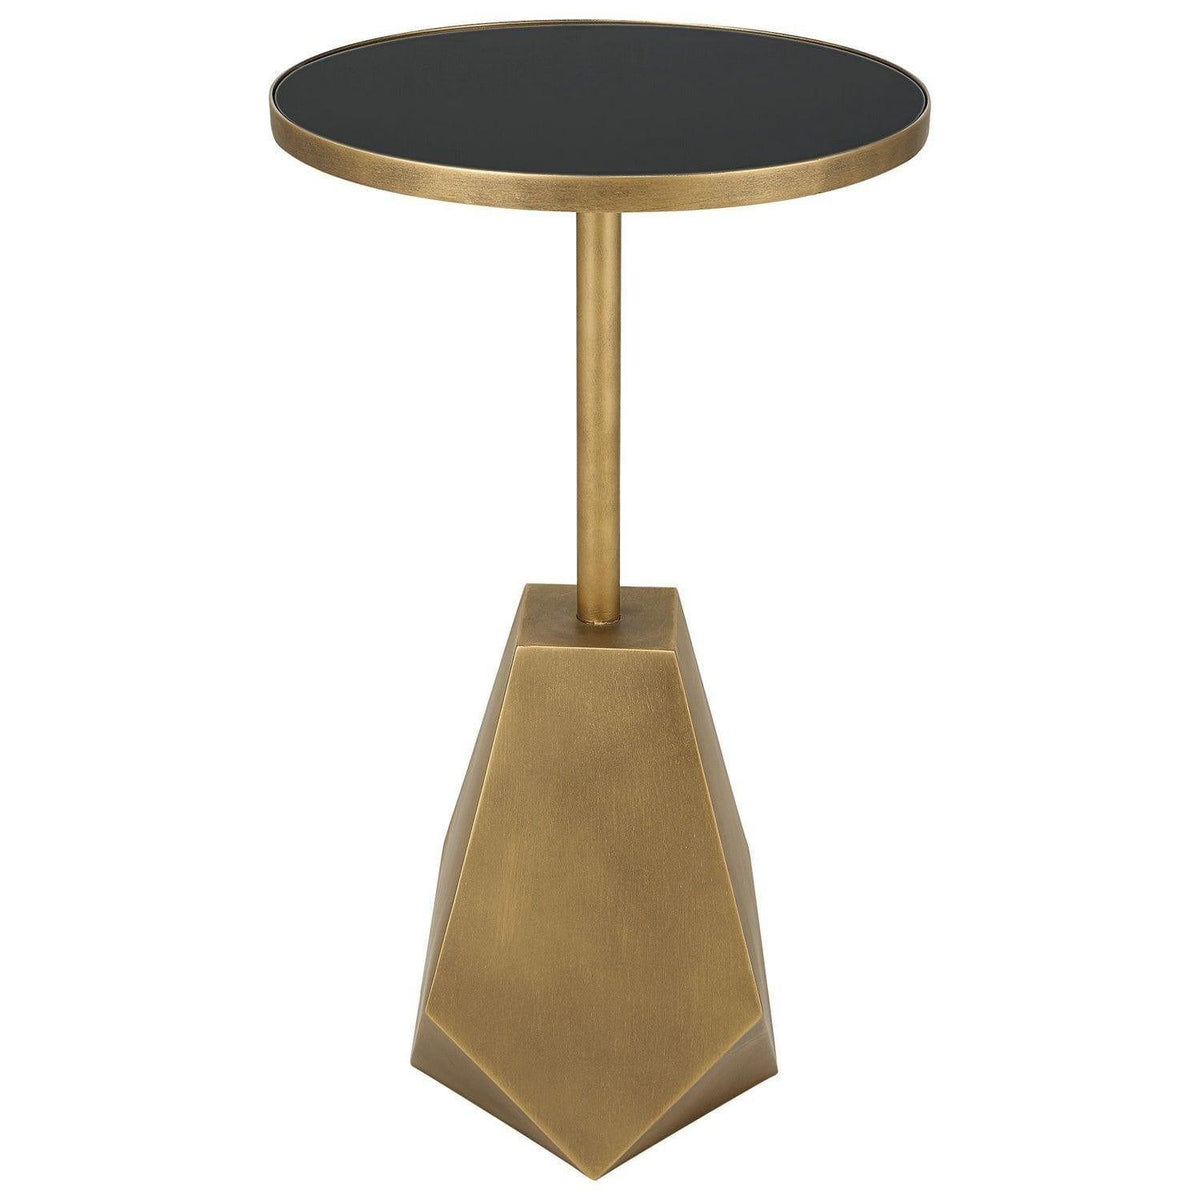 The Uttermost - Comet Accent Table - 25211 | Montreal Lighting & Hardware